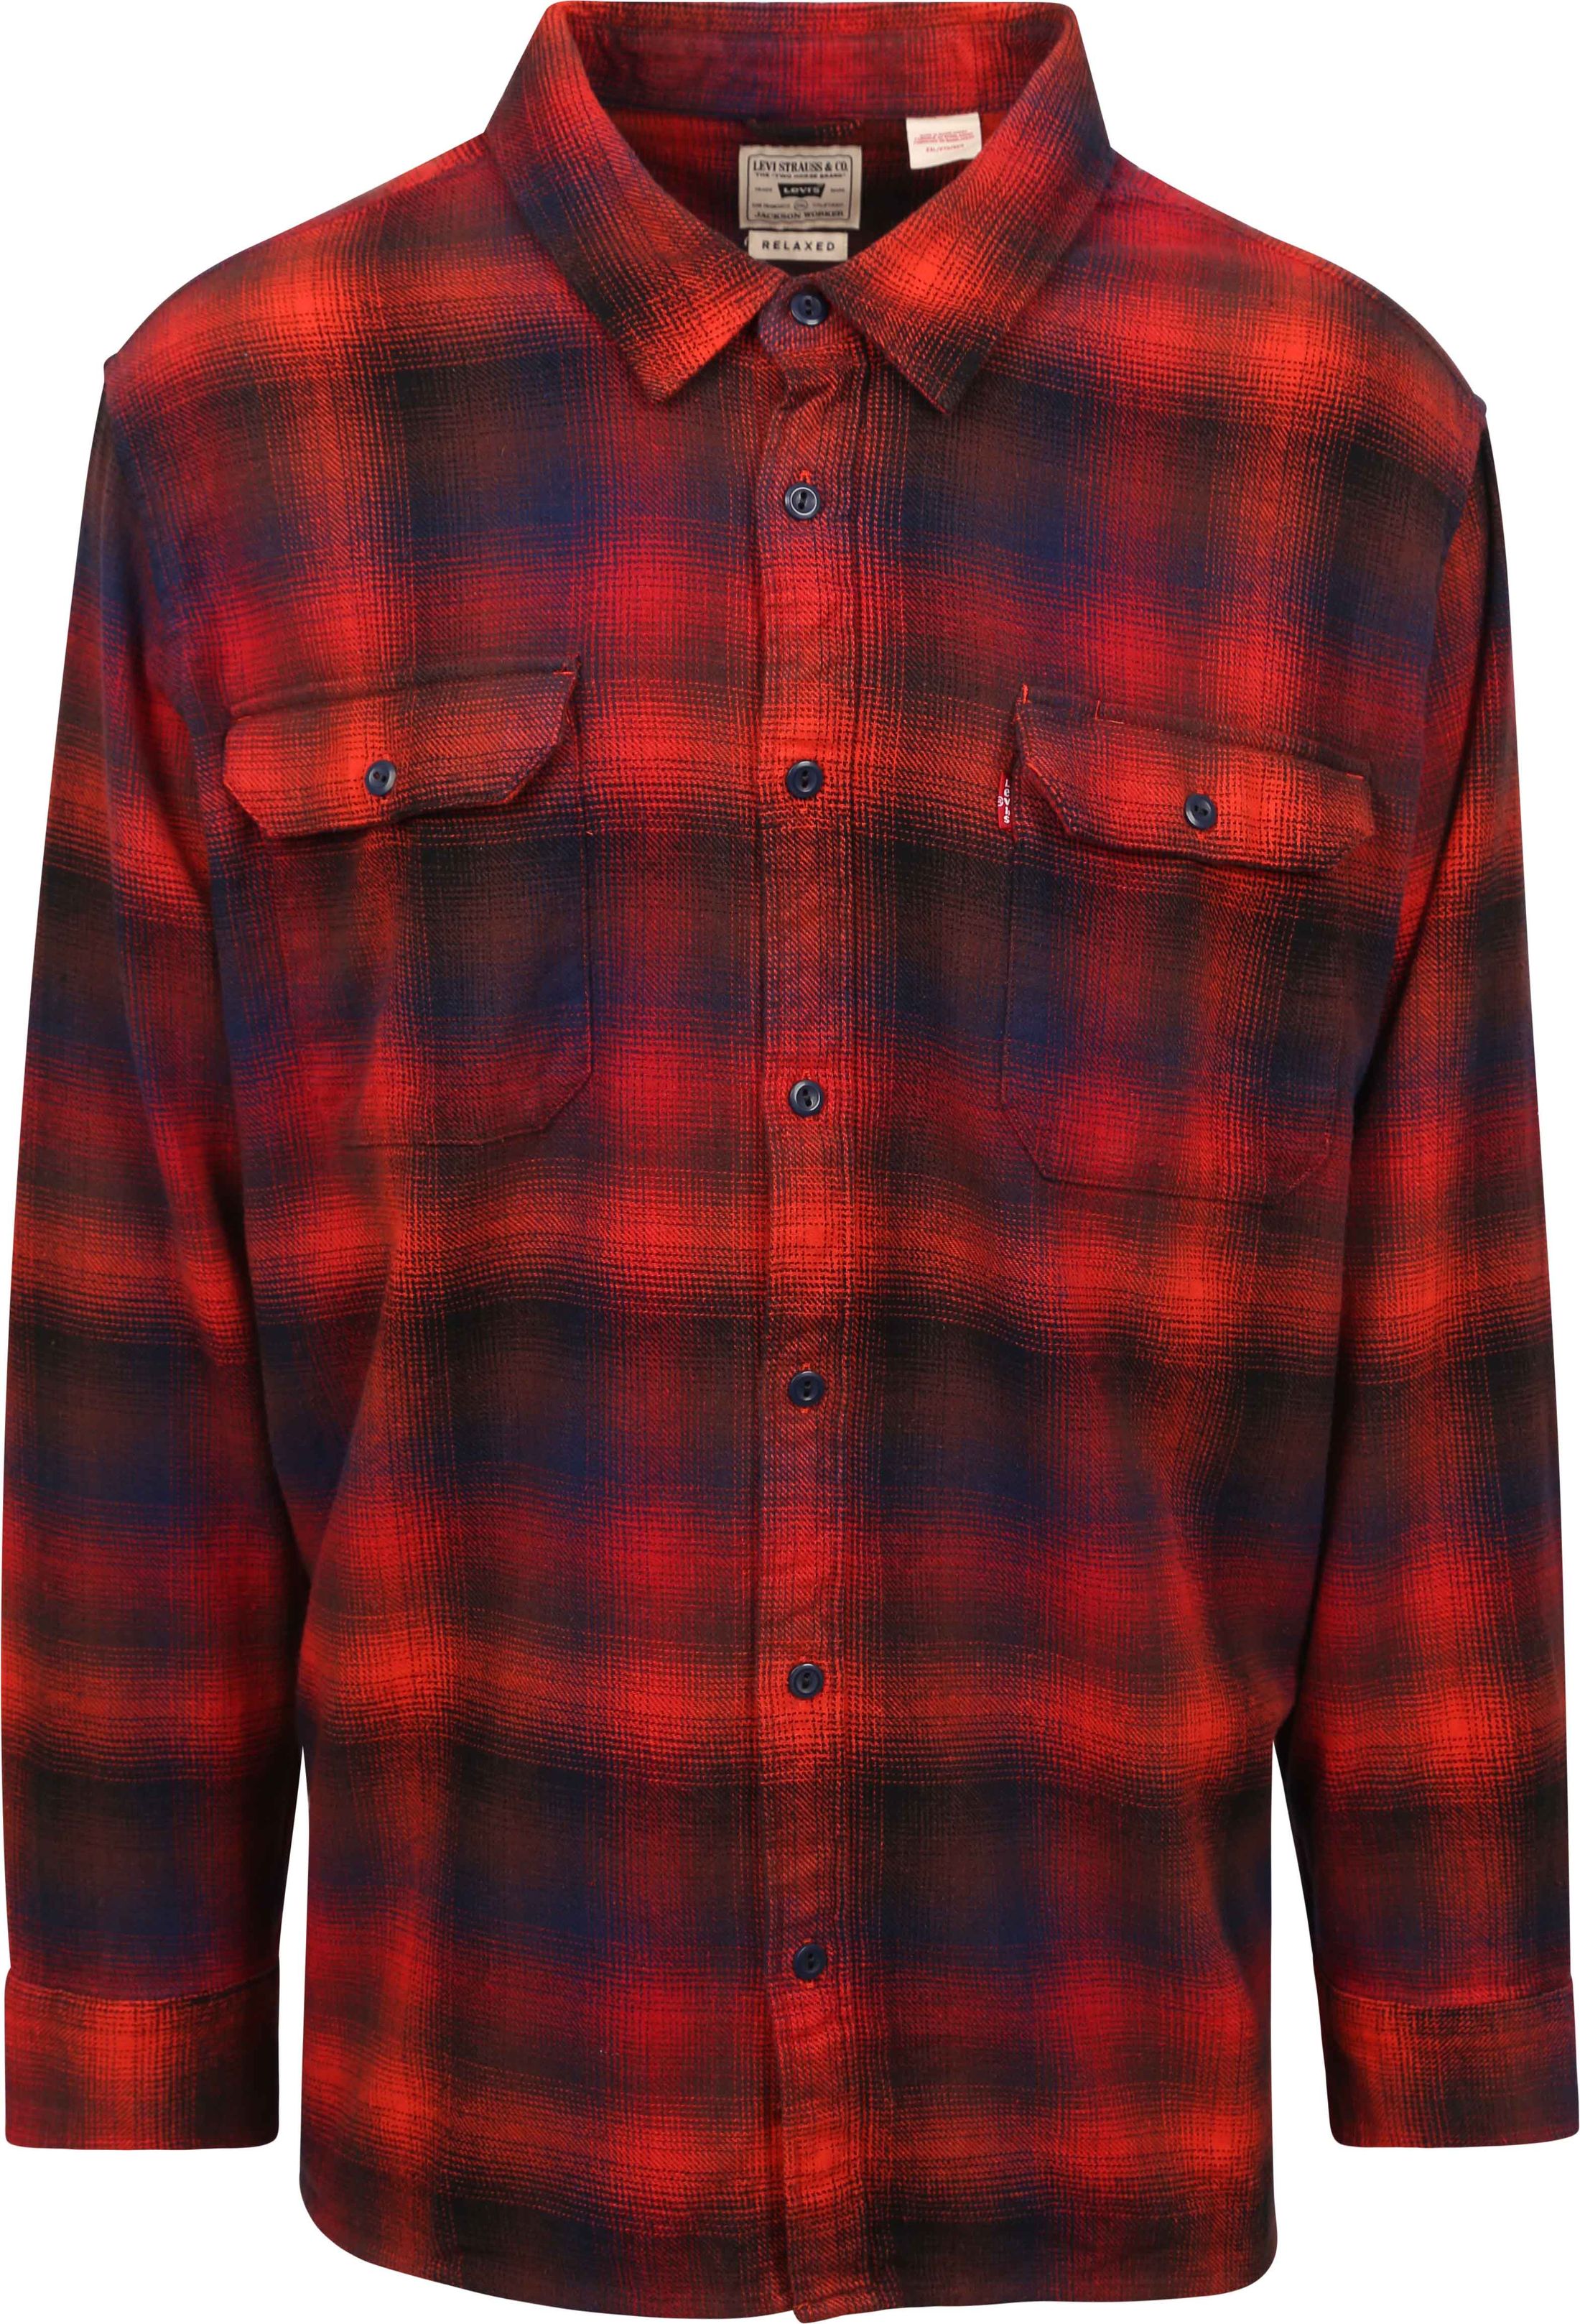 Levi's Overshirt Plaid  Red size 4XL product